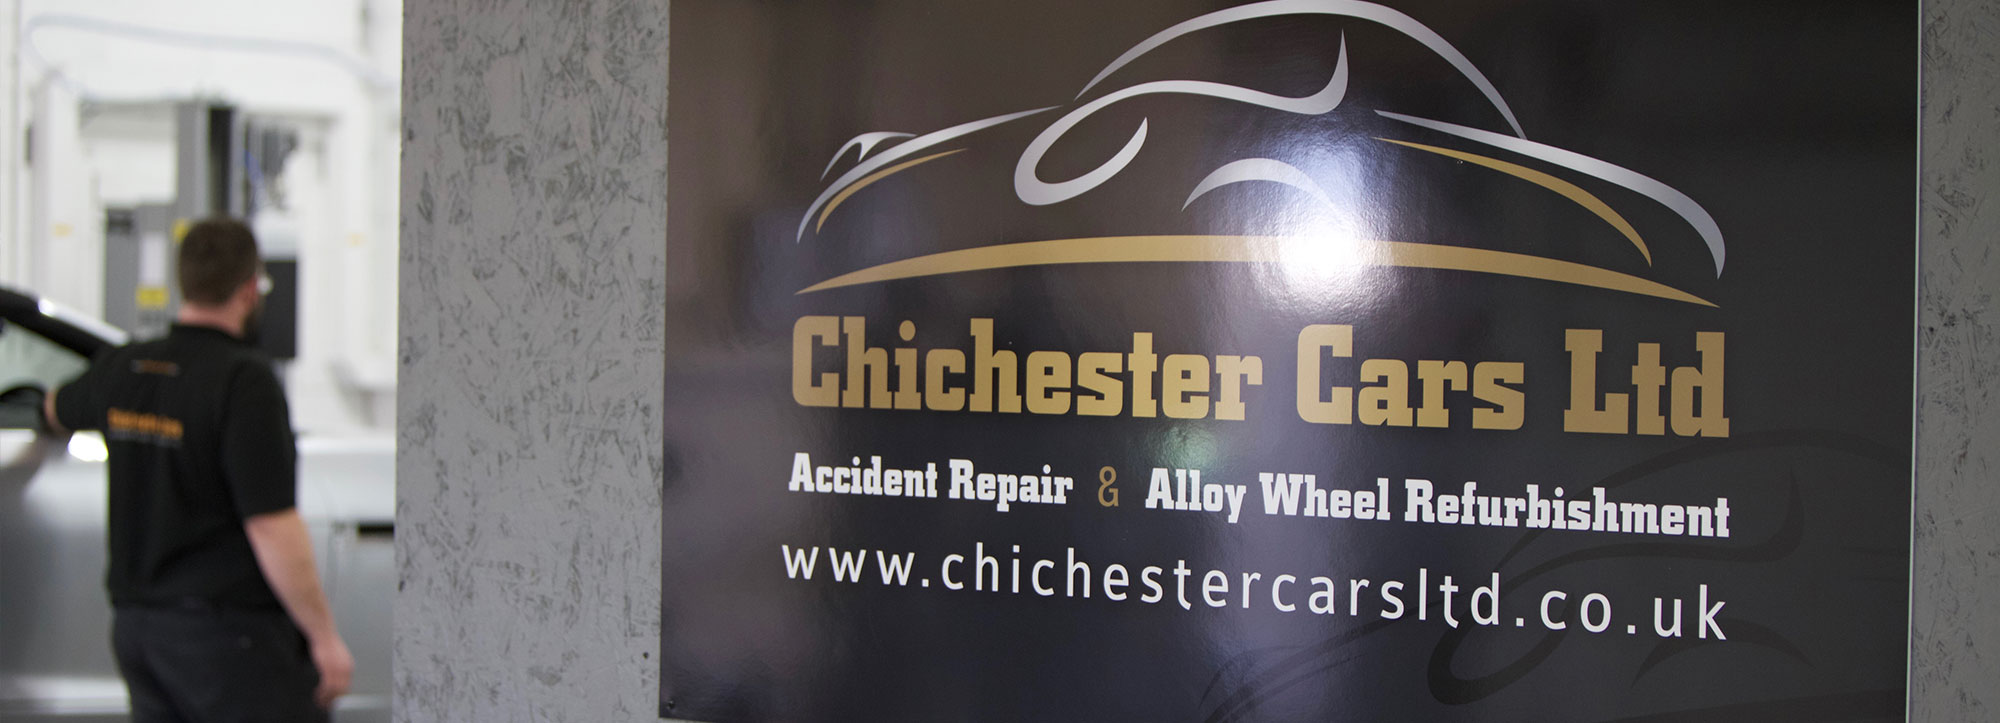 Chichester Cars